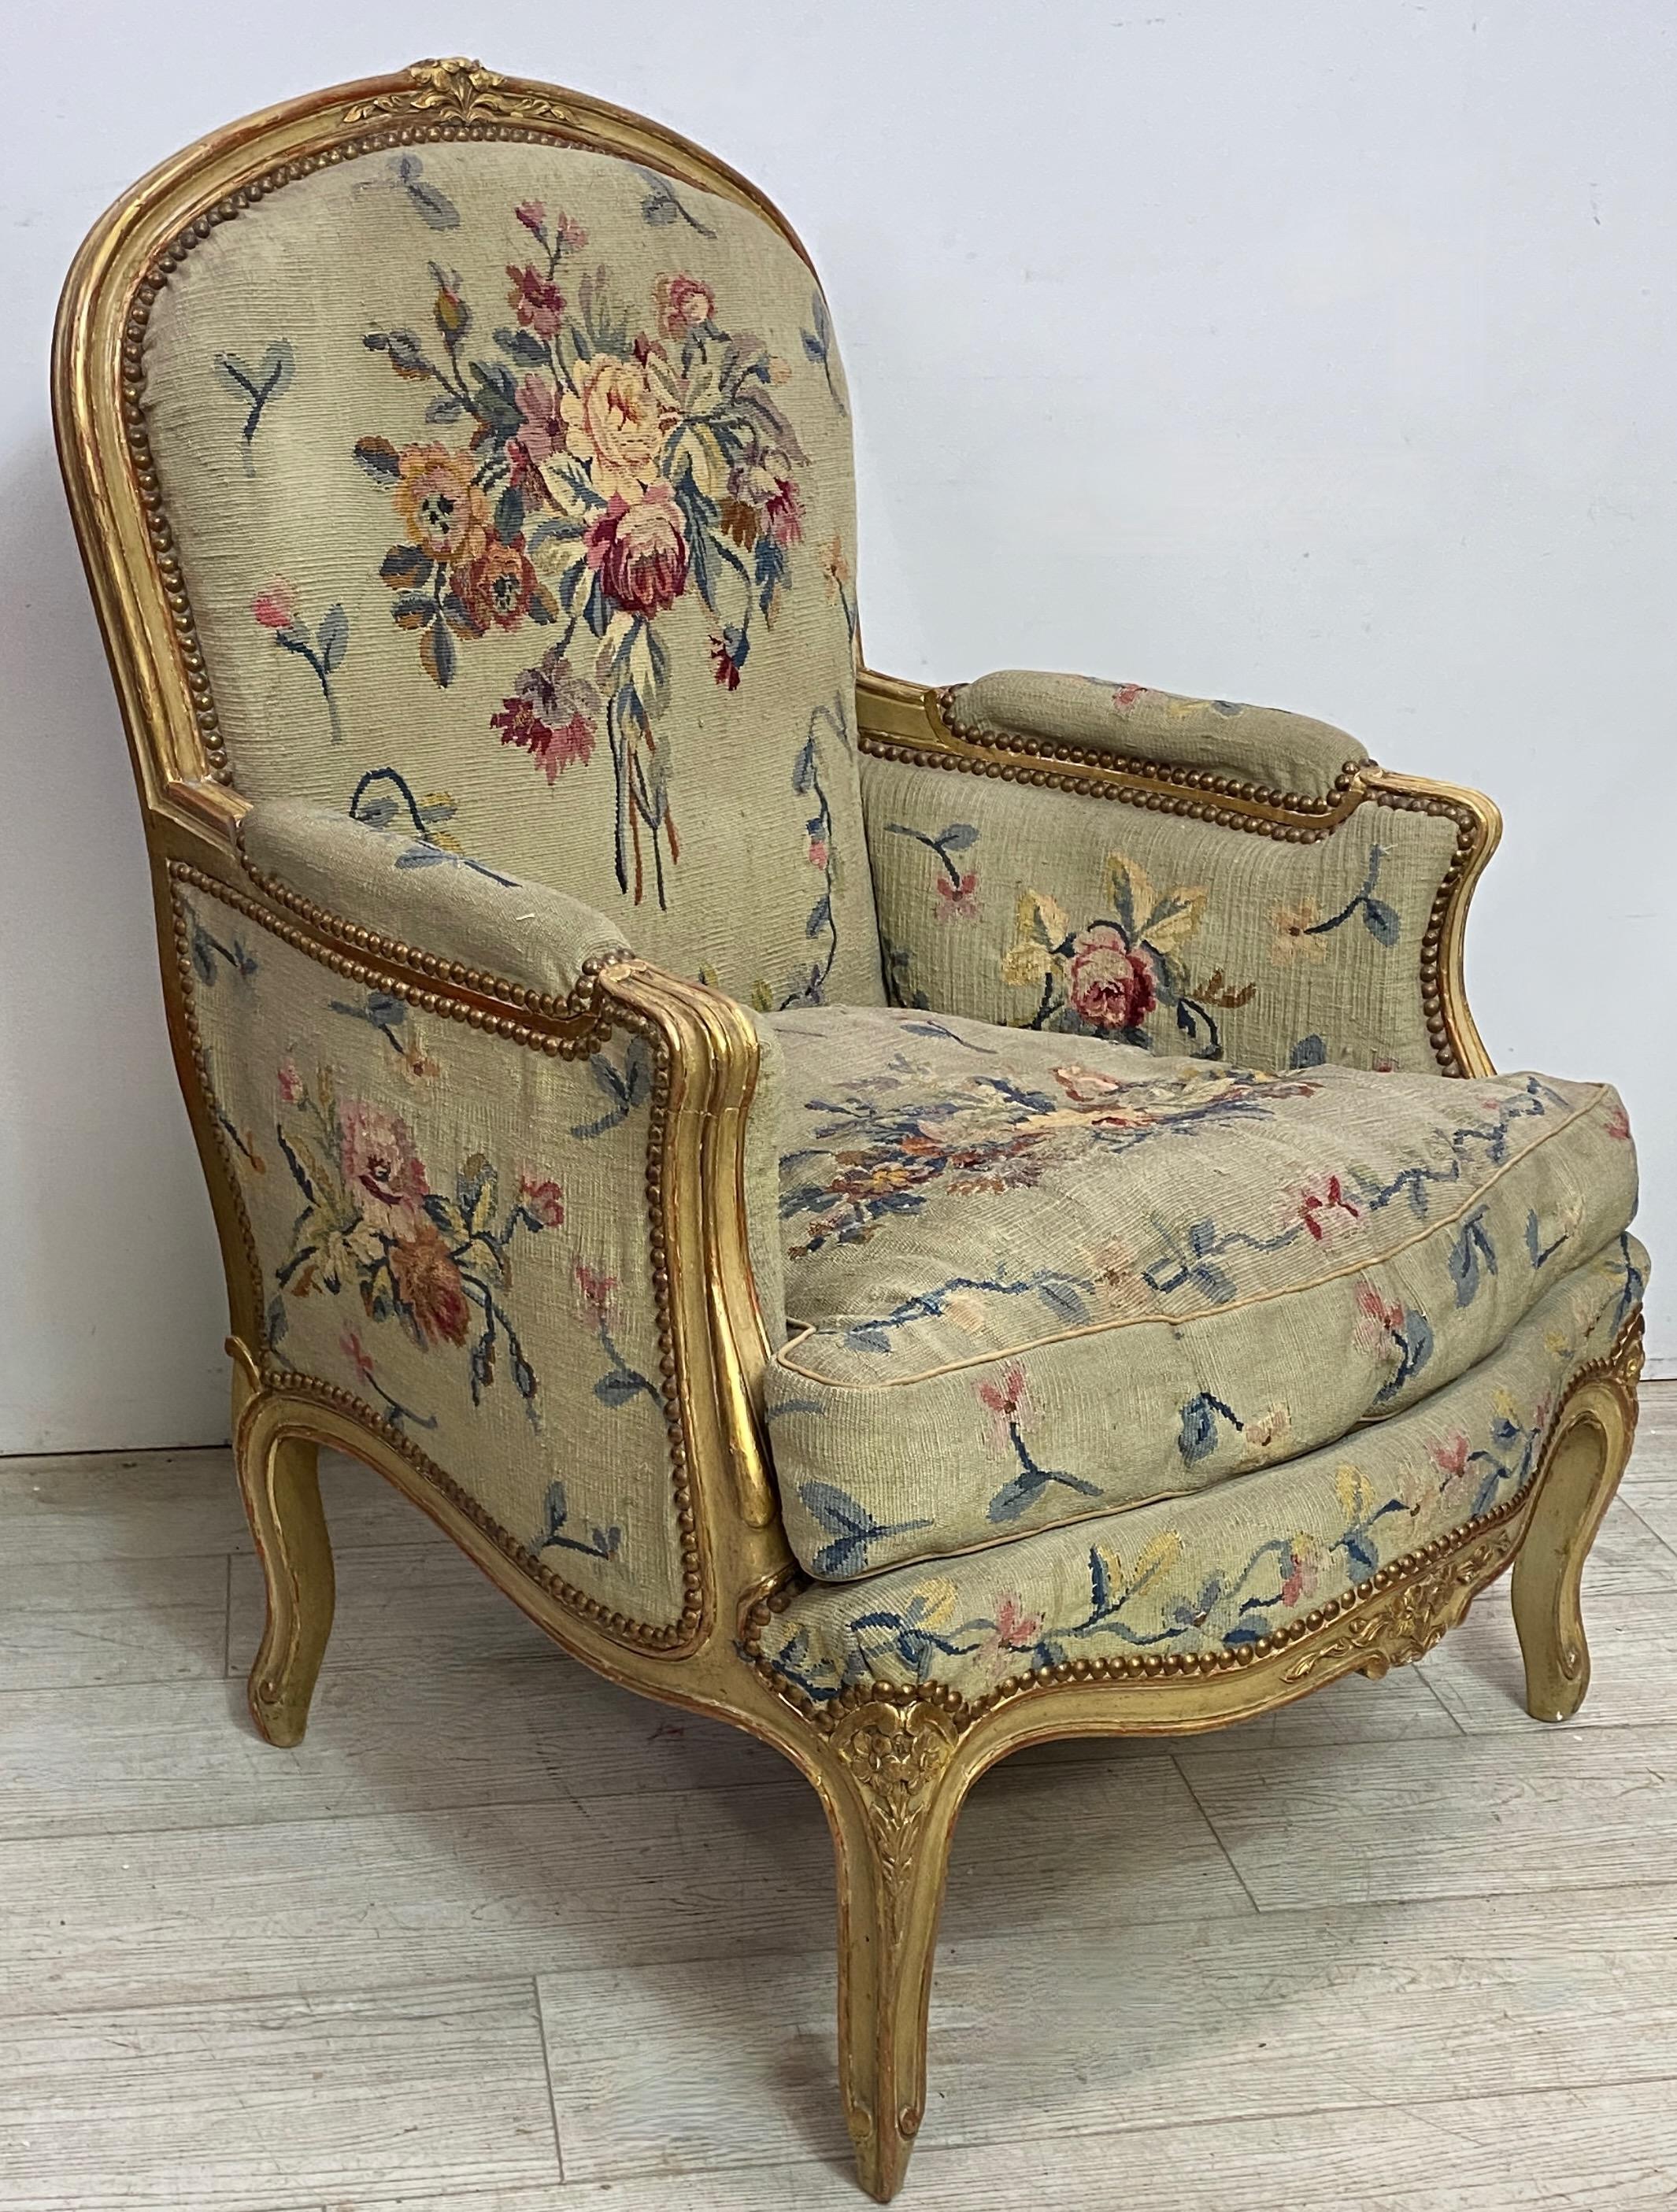 A hand crafted carved wood armchair upholstered with a hand woven wool tapestry in a floral design.
Having original paint and gilding. 
Recently cleared and refurbished. A very comfortable chair, sturdy and sound.
Early 20th century, France.
